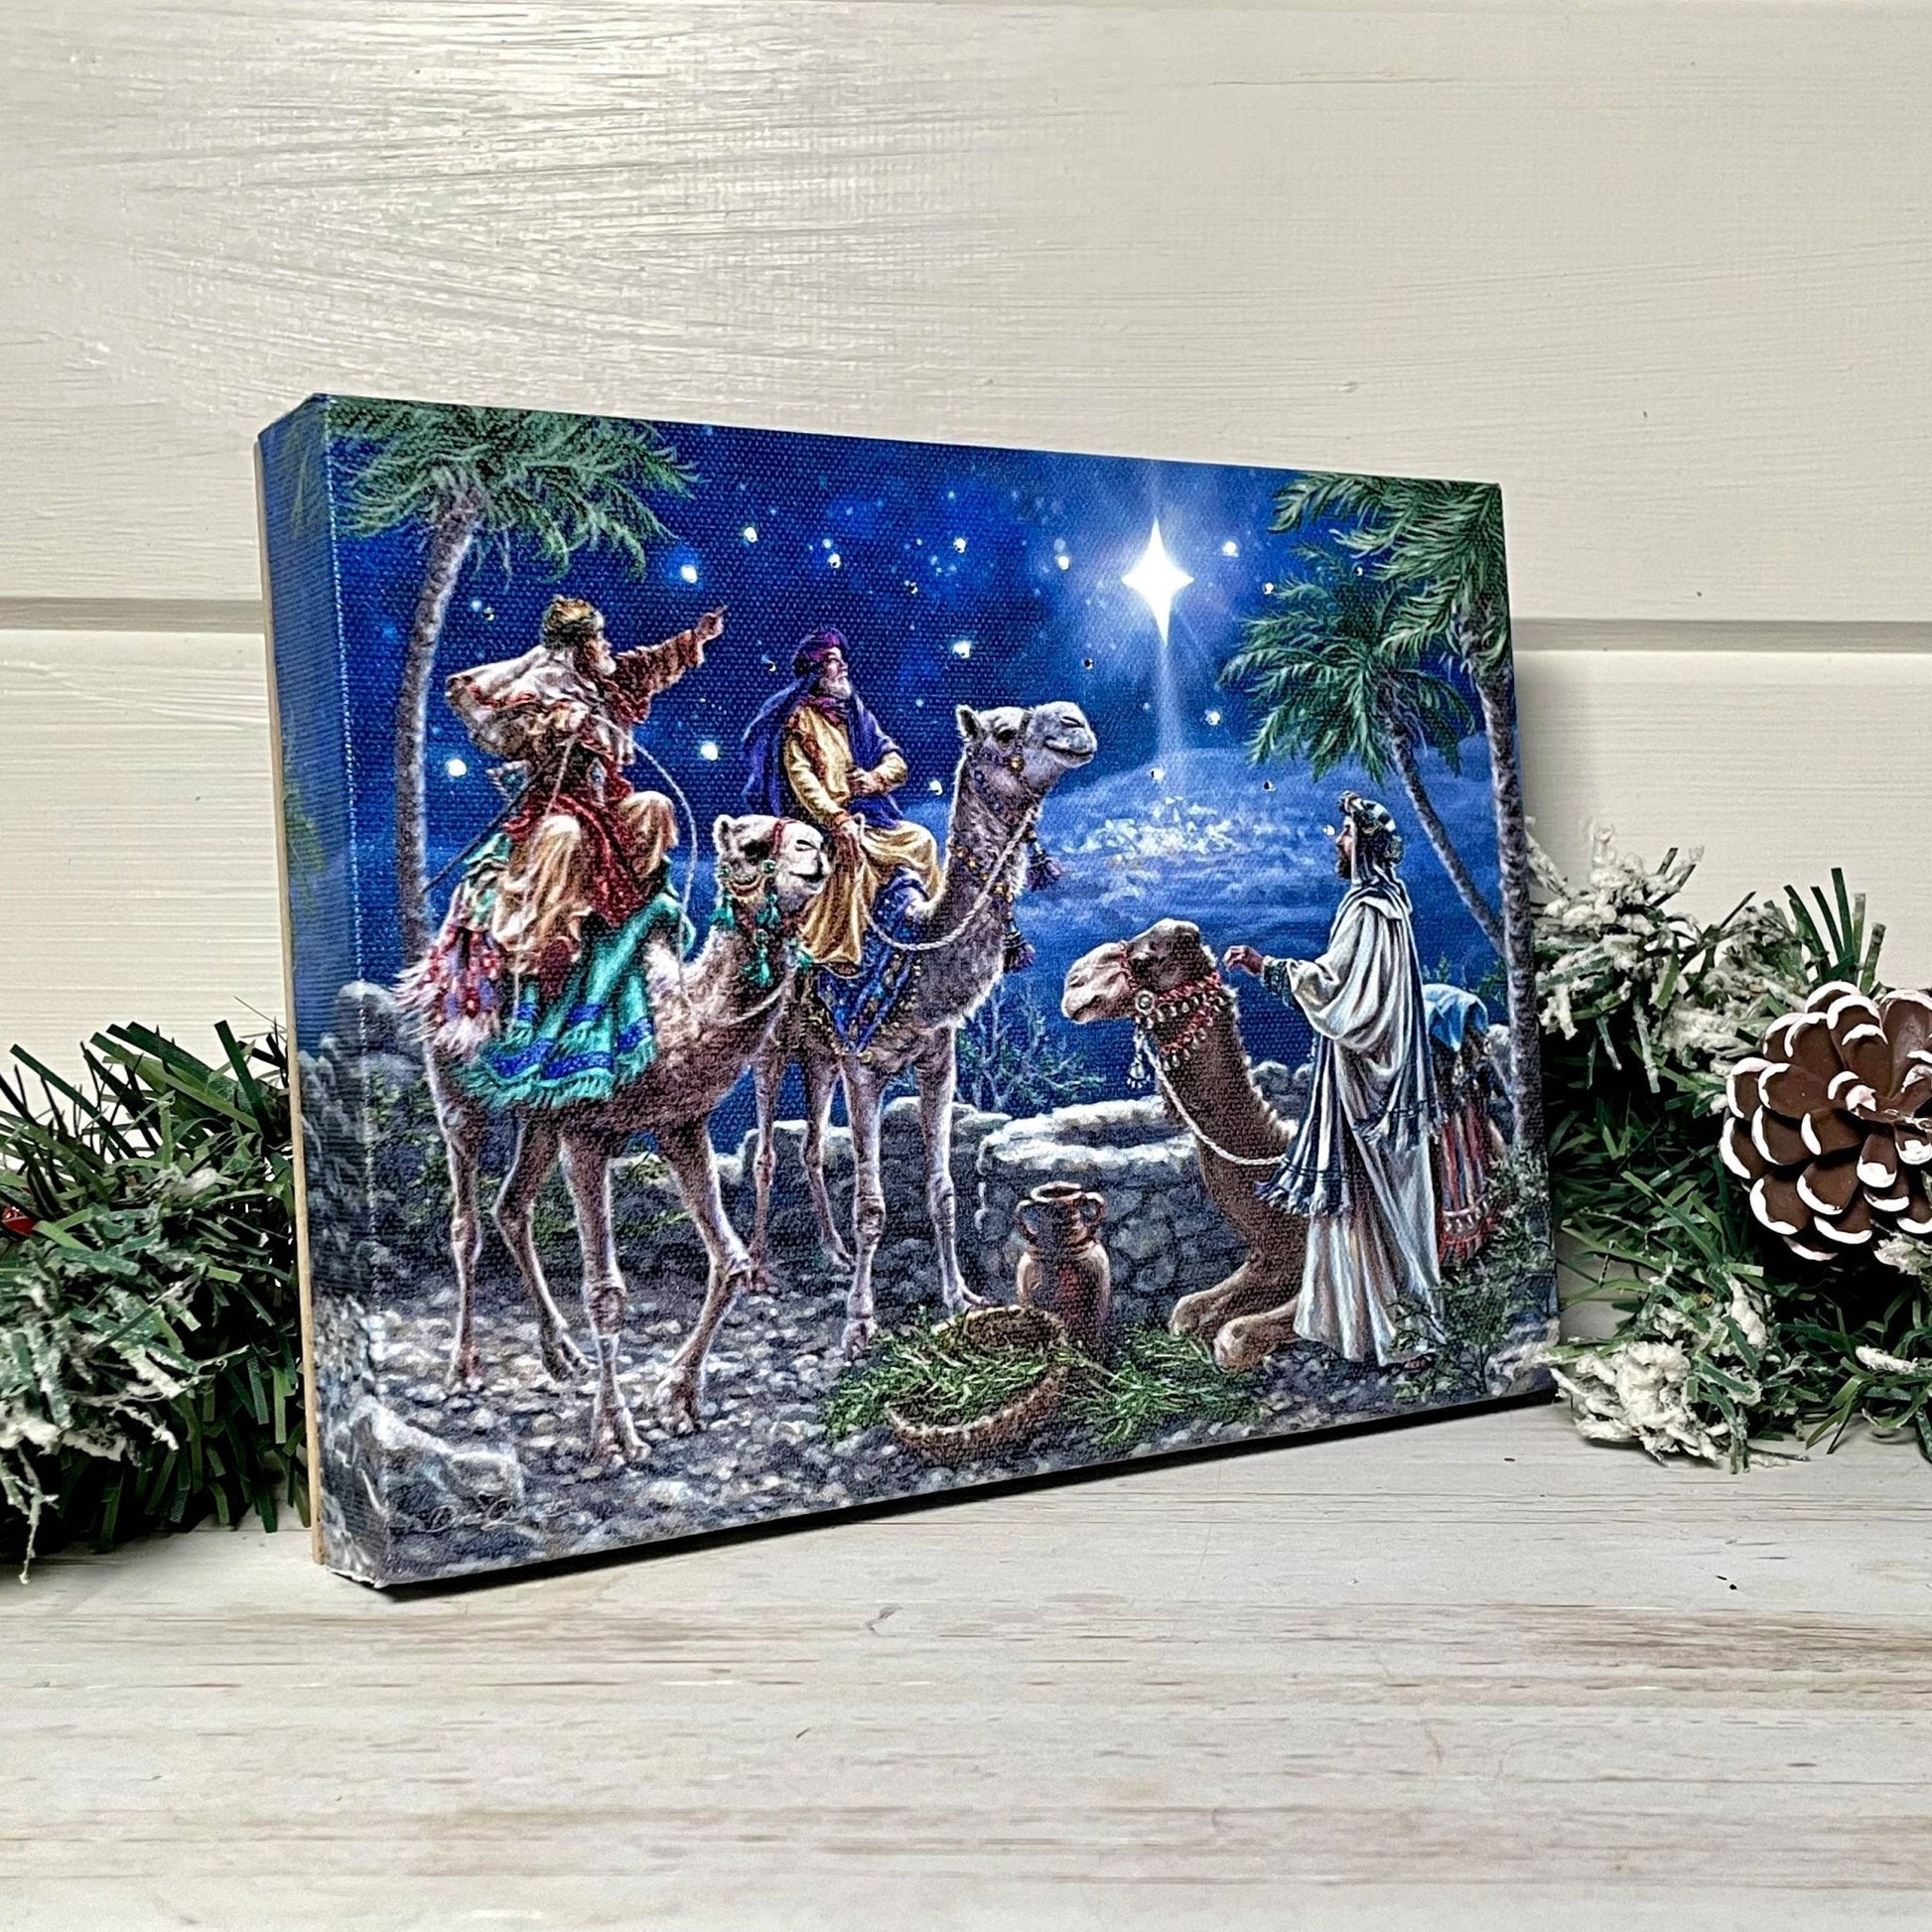 The Magi 8x6 Lighted Tabletop Canvas | 2FruitBearers